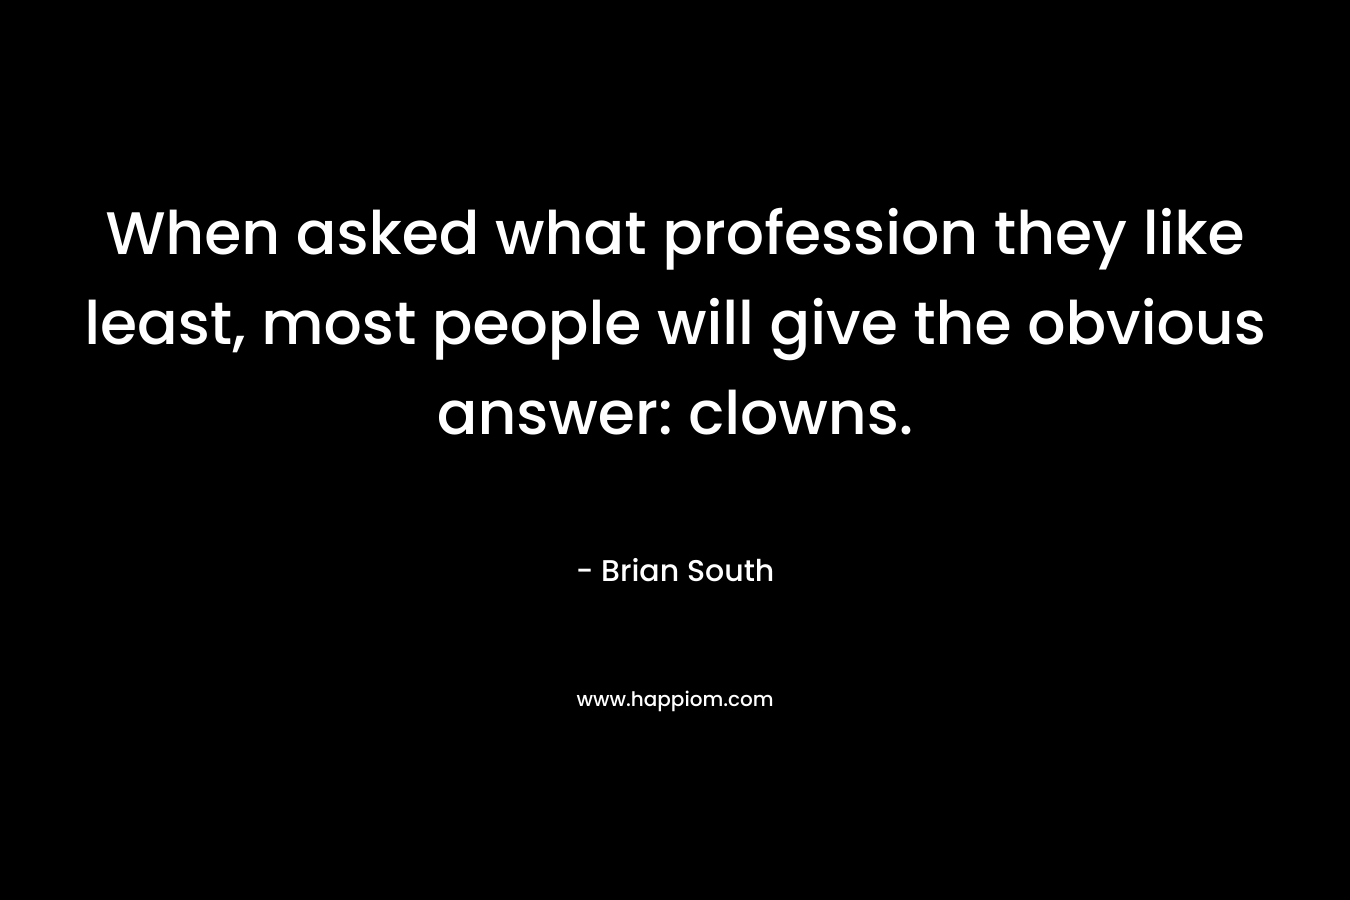 When asked what profession they like least, most people will give the obvious answer: clowns. – Brian South